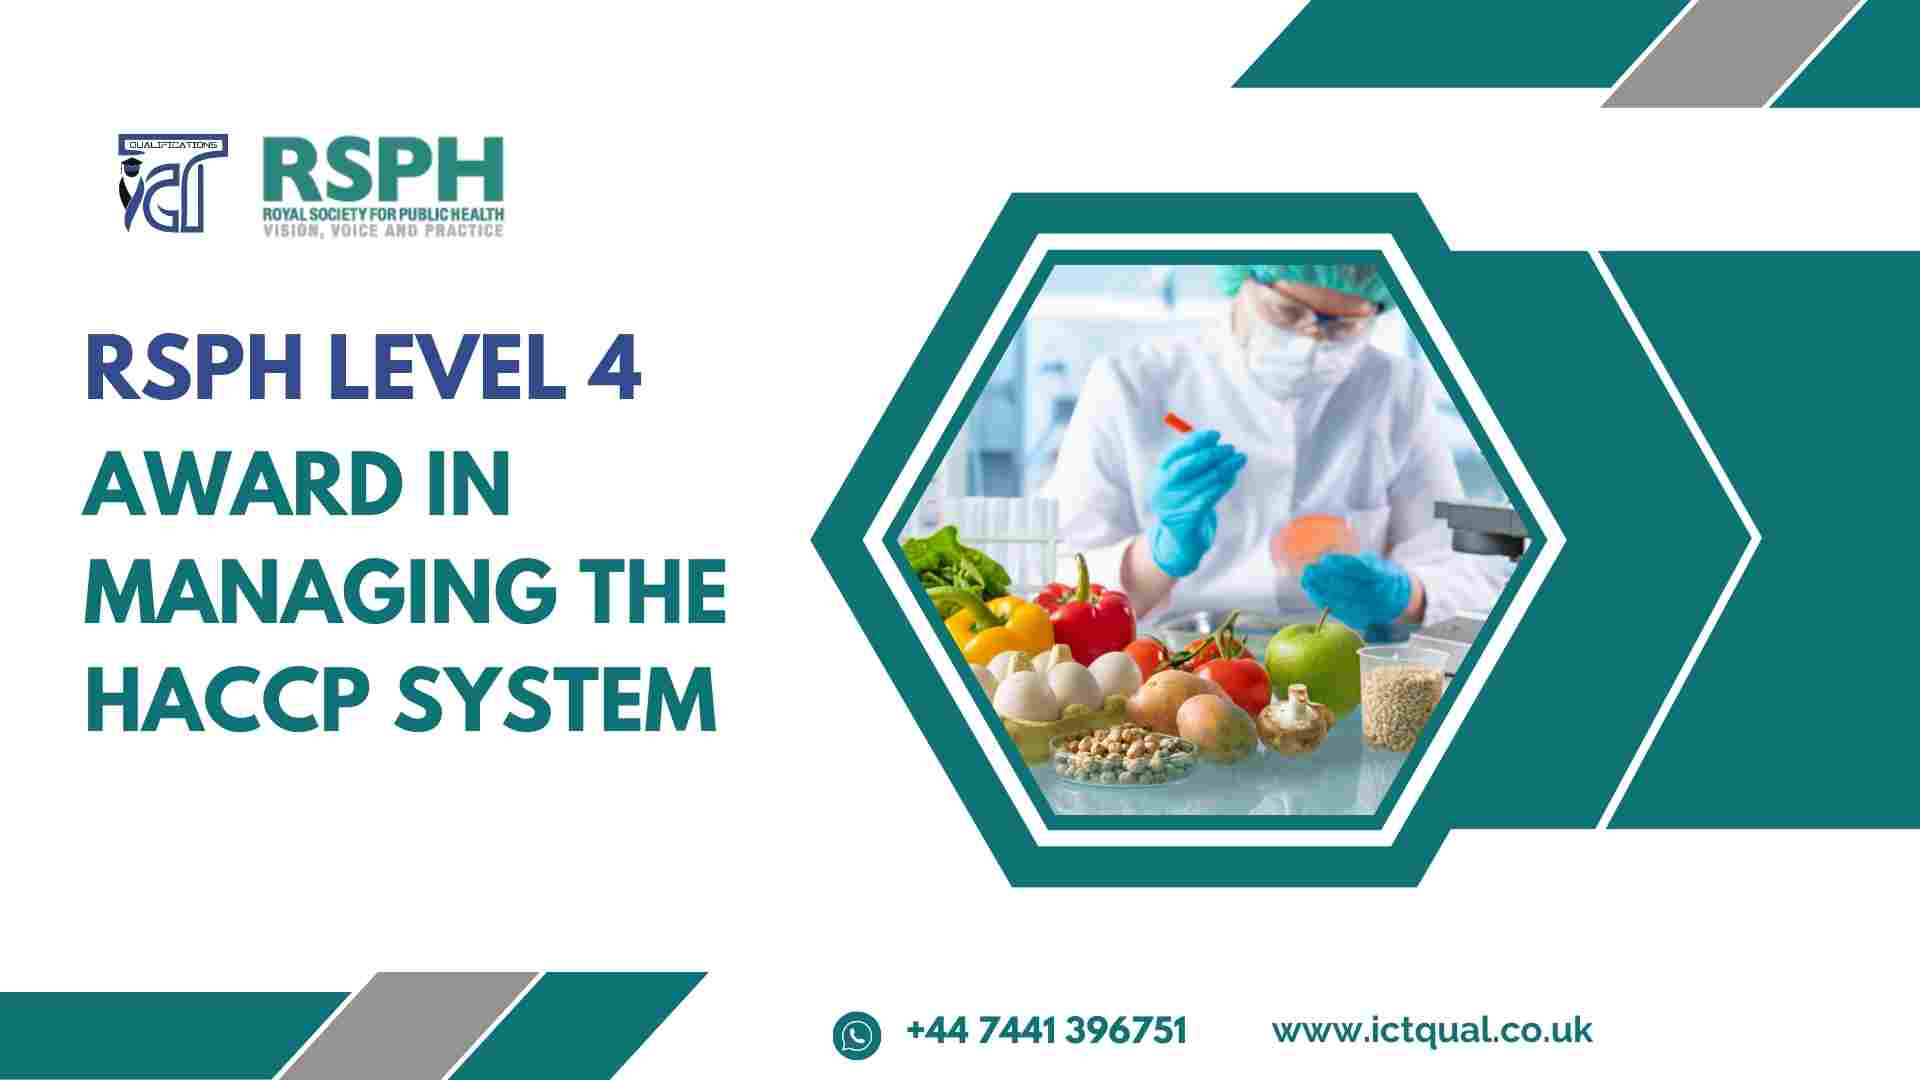 RSPH Level 4 Award in Managing the HACCP System